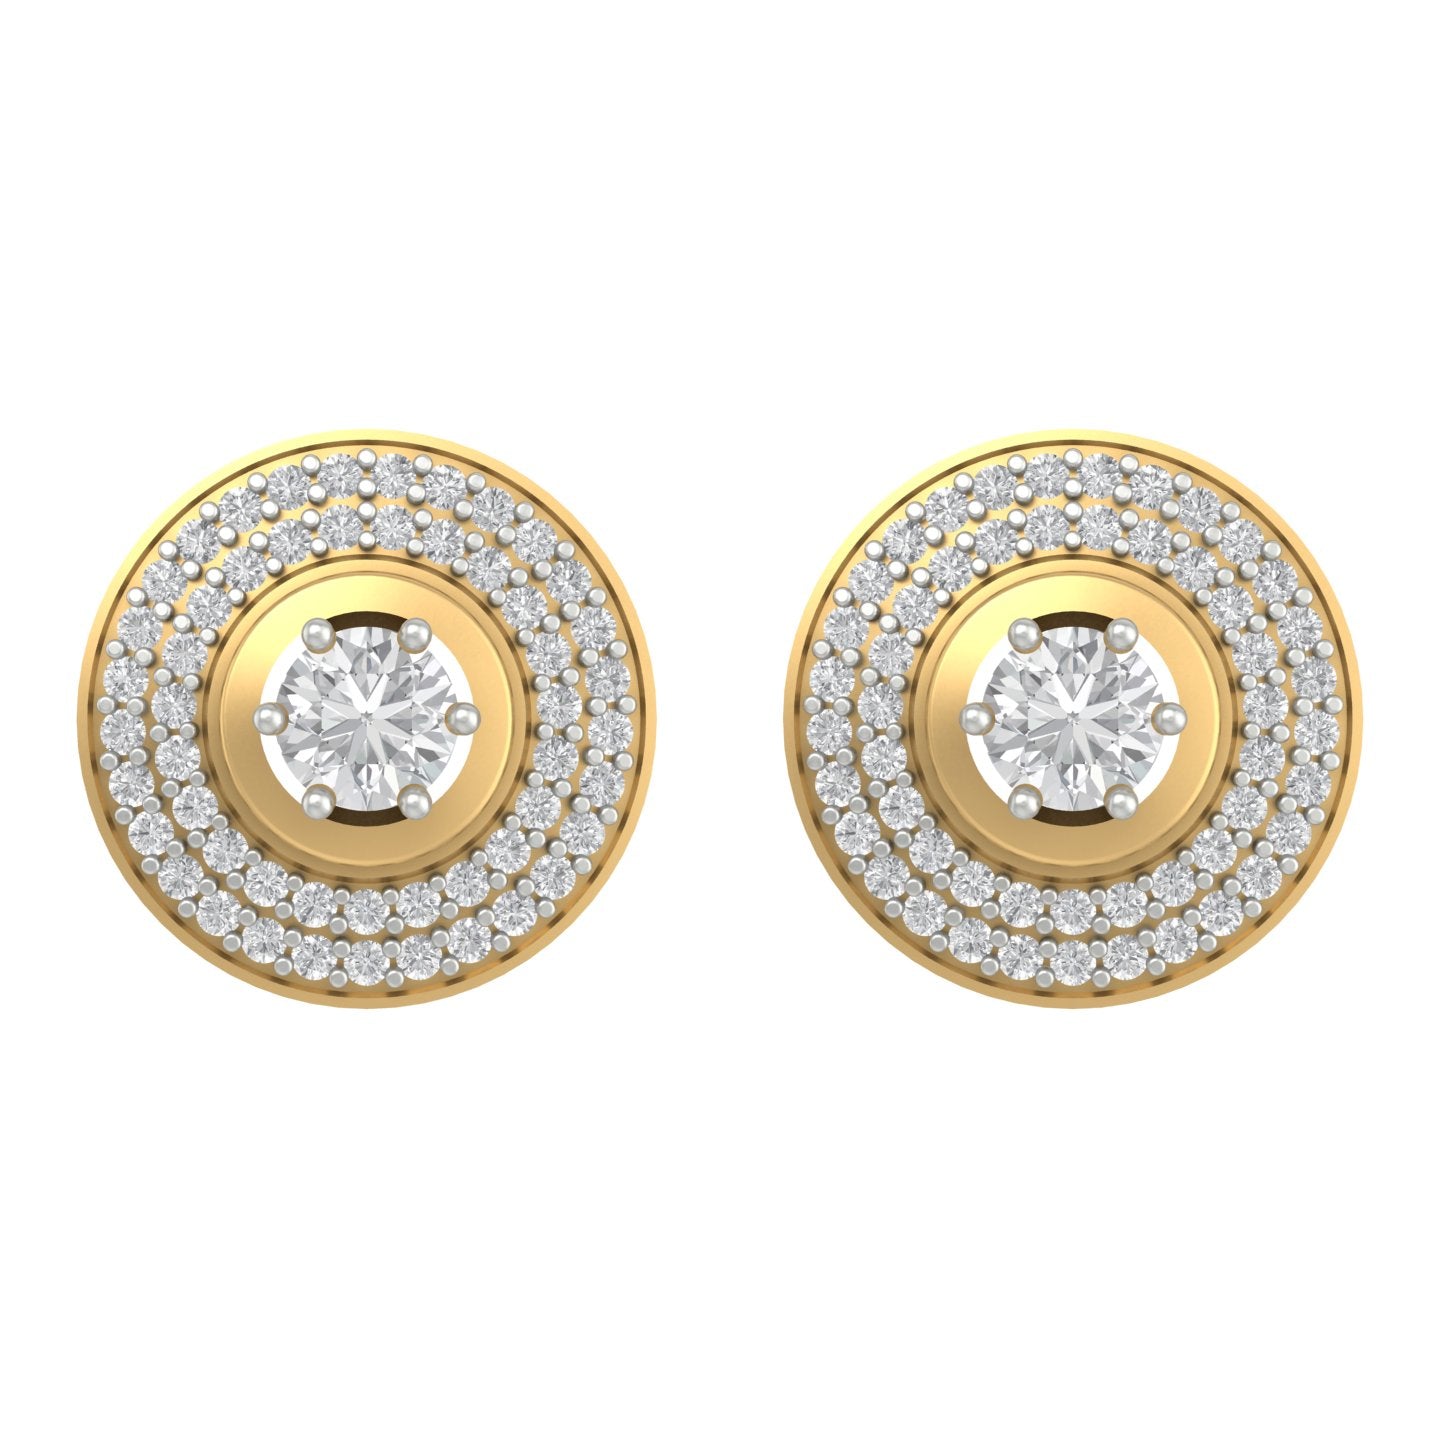 Round Halo Cubic Zirconia Stud Earrings – Connie Craig Carroll Style